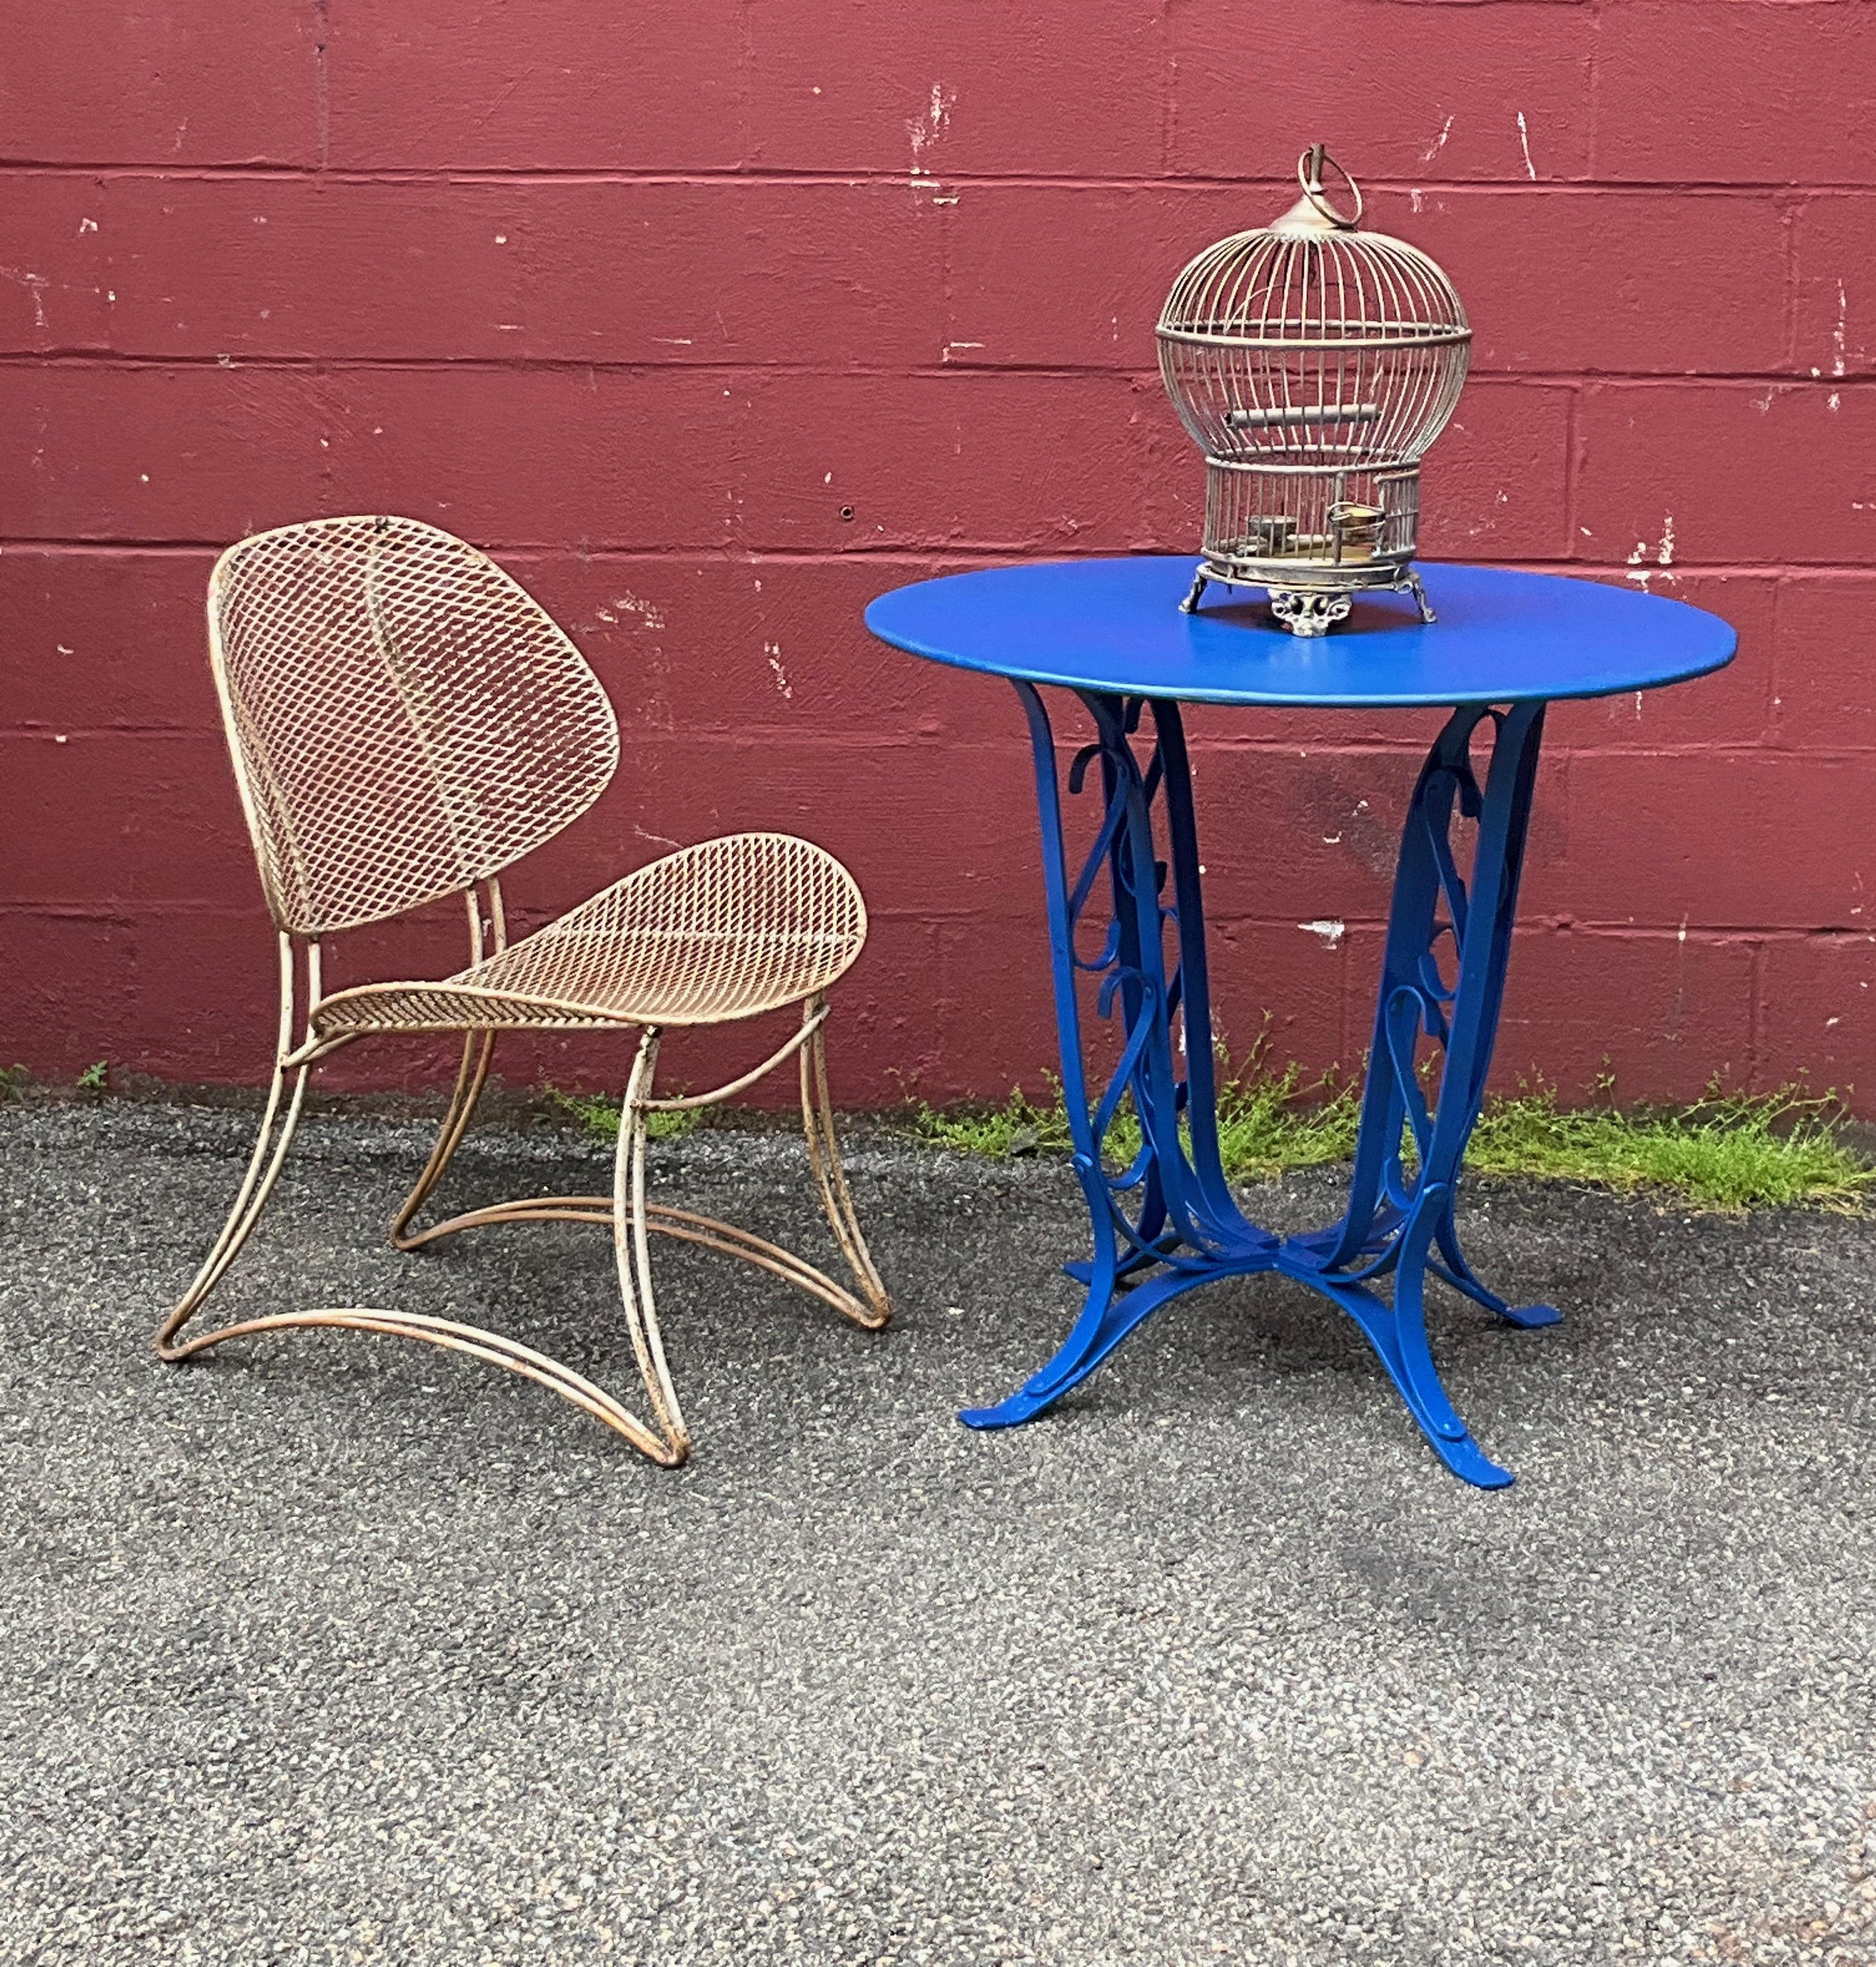 Here is a classic French garden table made in the 1920s. This table has been recently repainted in a brilliant blue rust resistant finish and is ready to be placed outside. The metal top has an opening to hold an umbrella (parasol) to give you